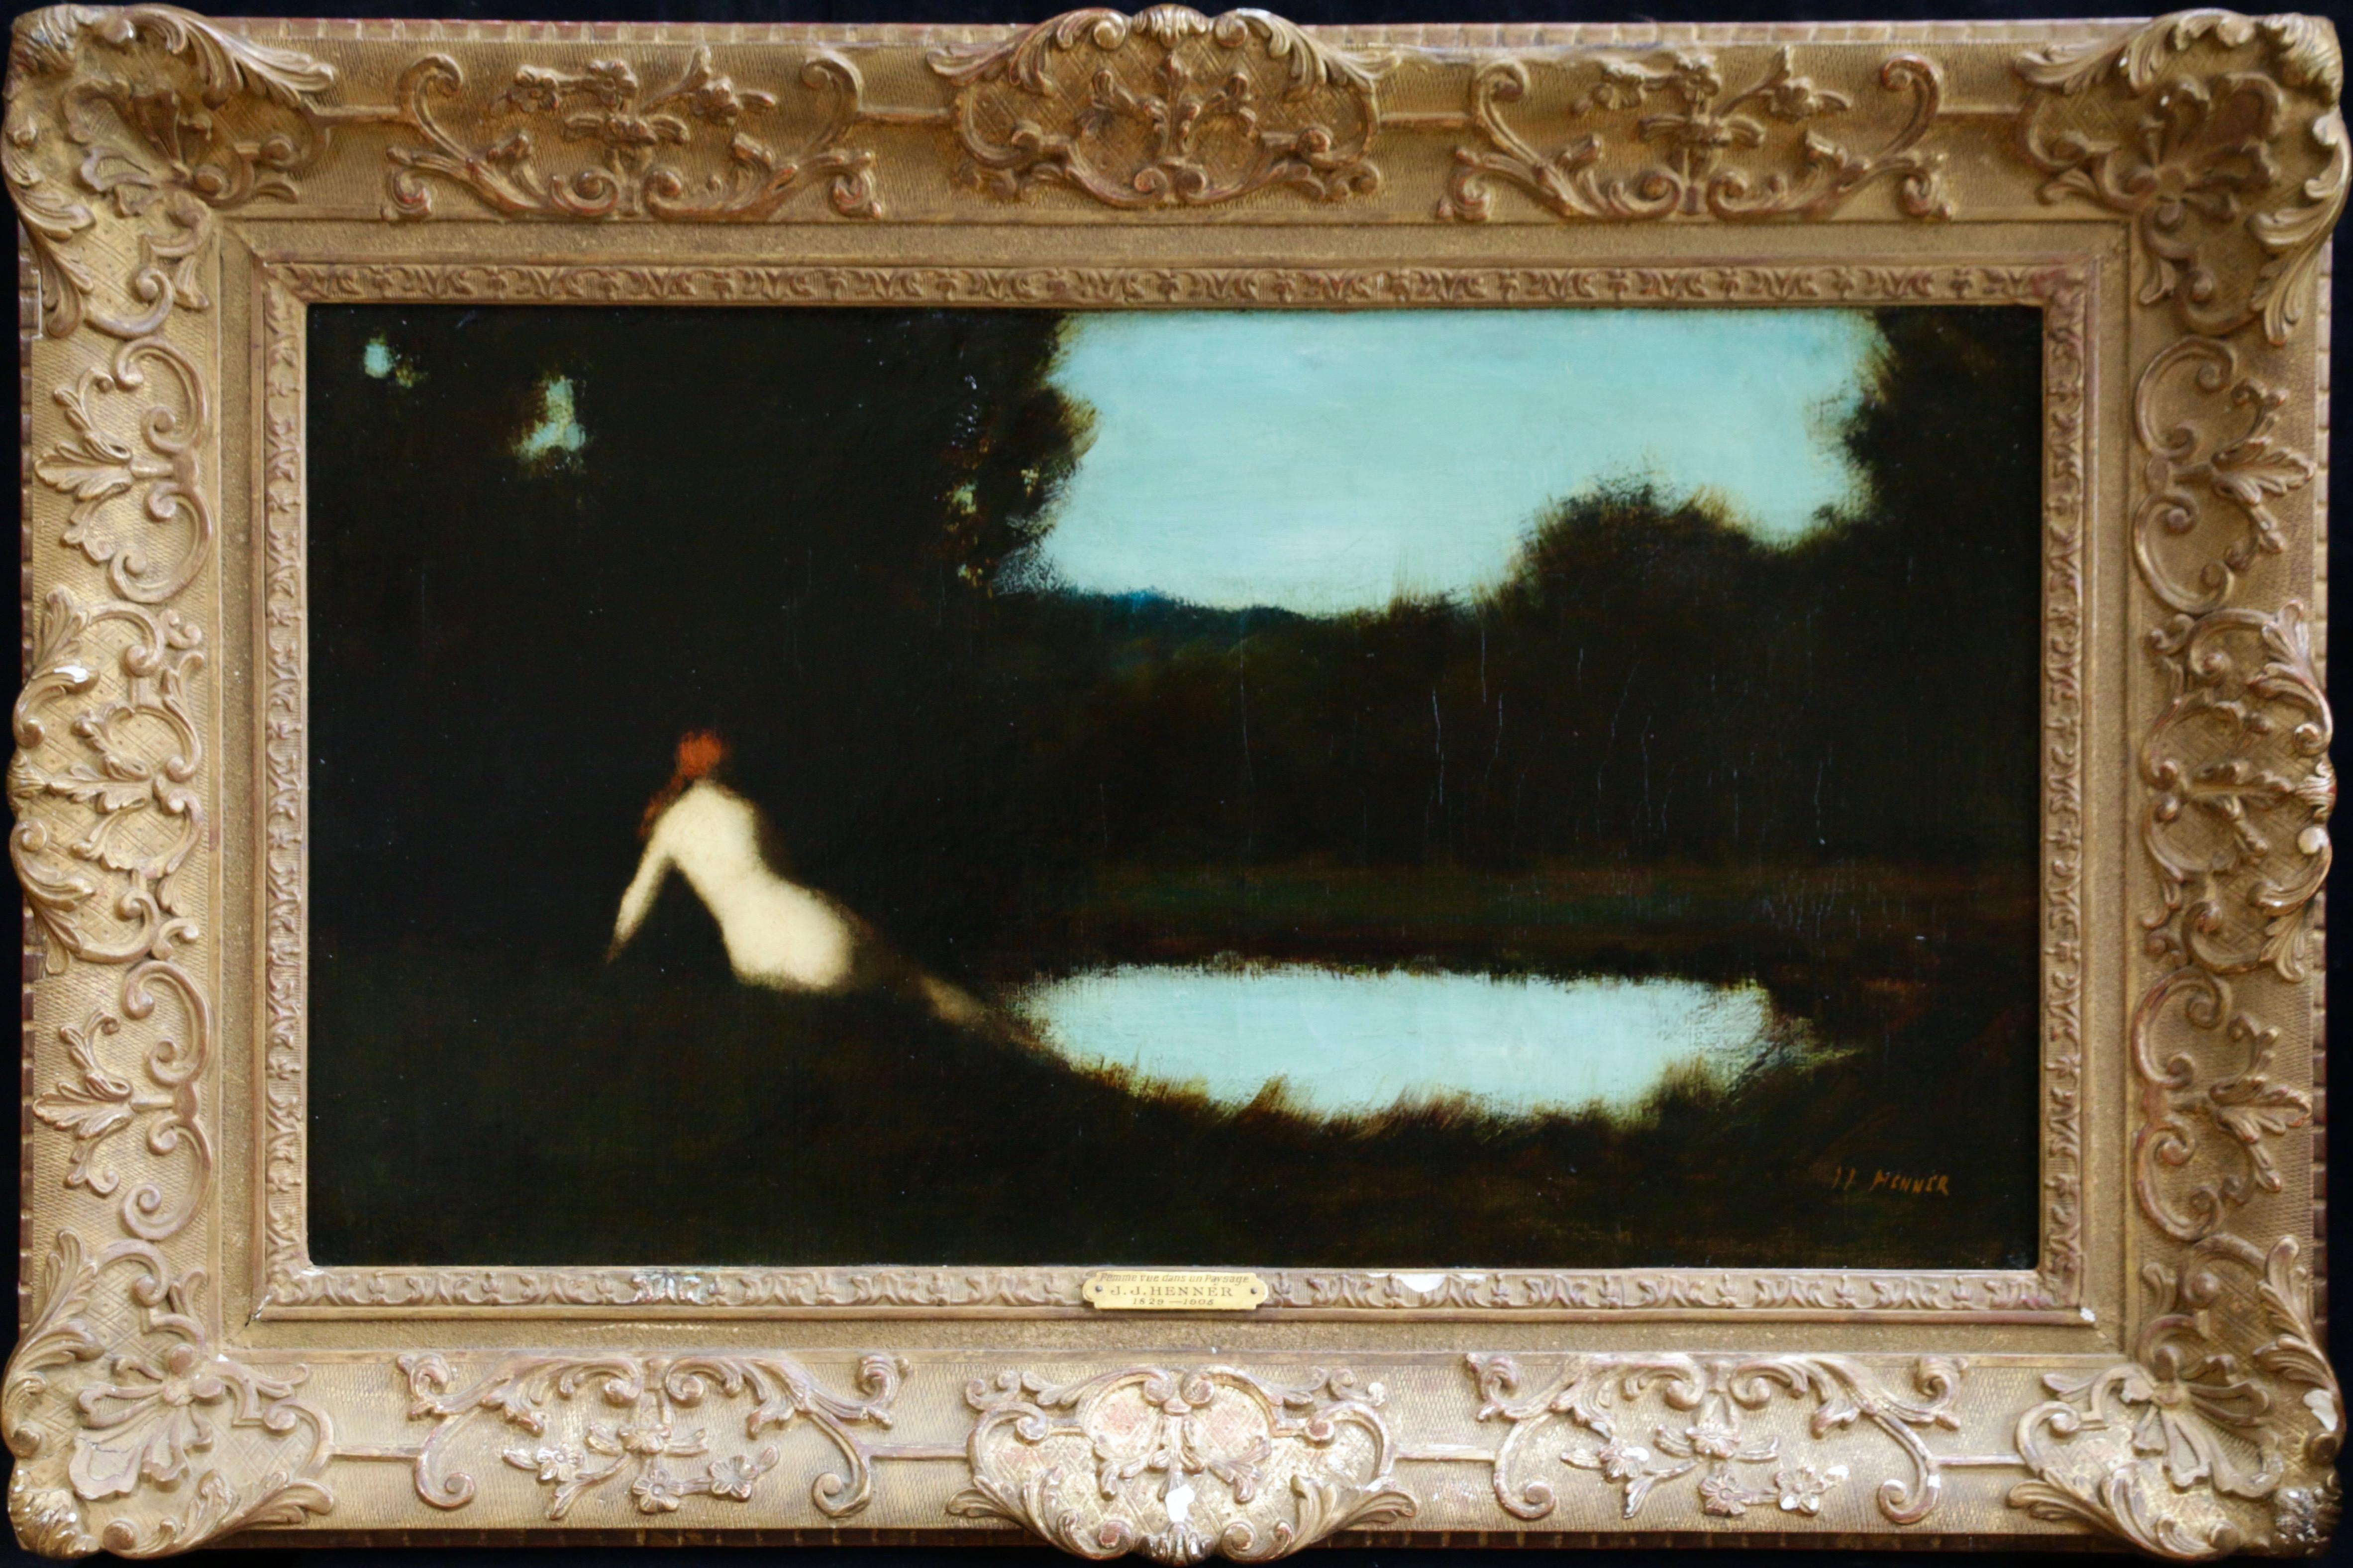 Jean-Jacques Henner Landscape Painting - Apres Le Bain - 19th Century Oil, Nude Figure Resting by Water by J J Henner